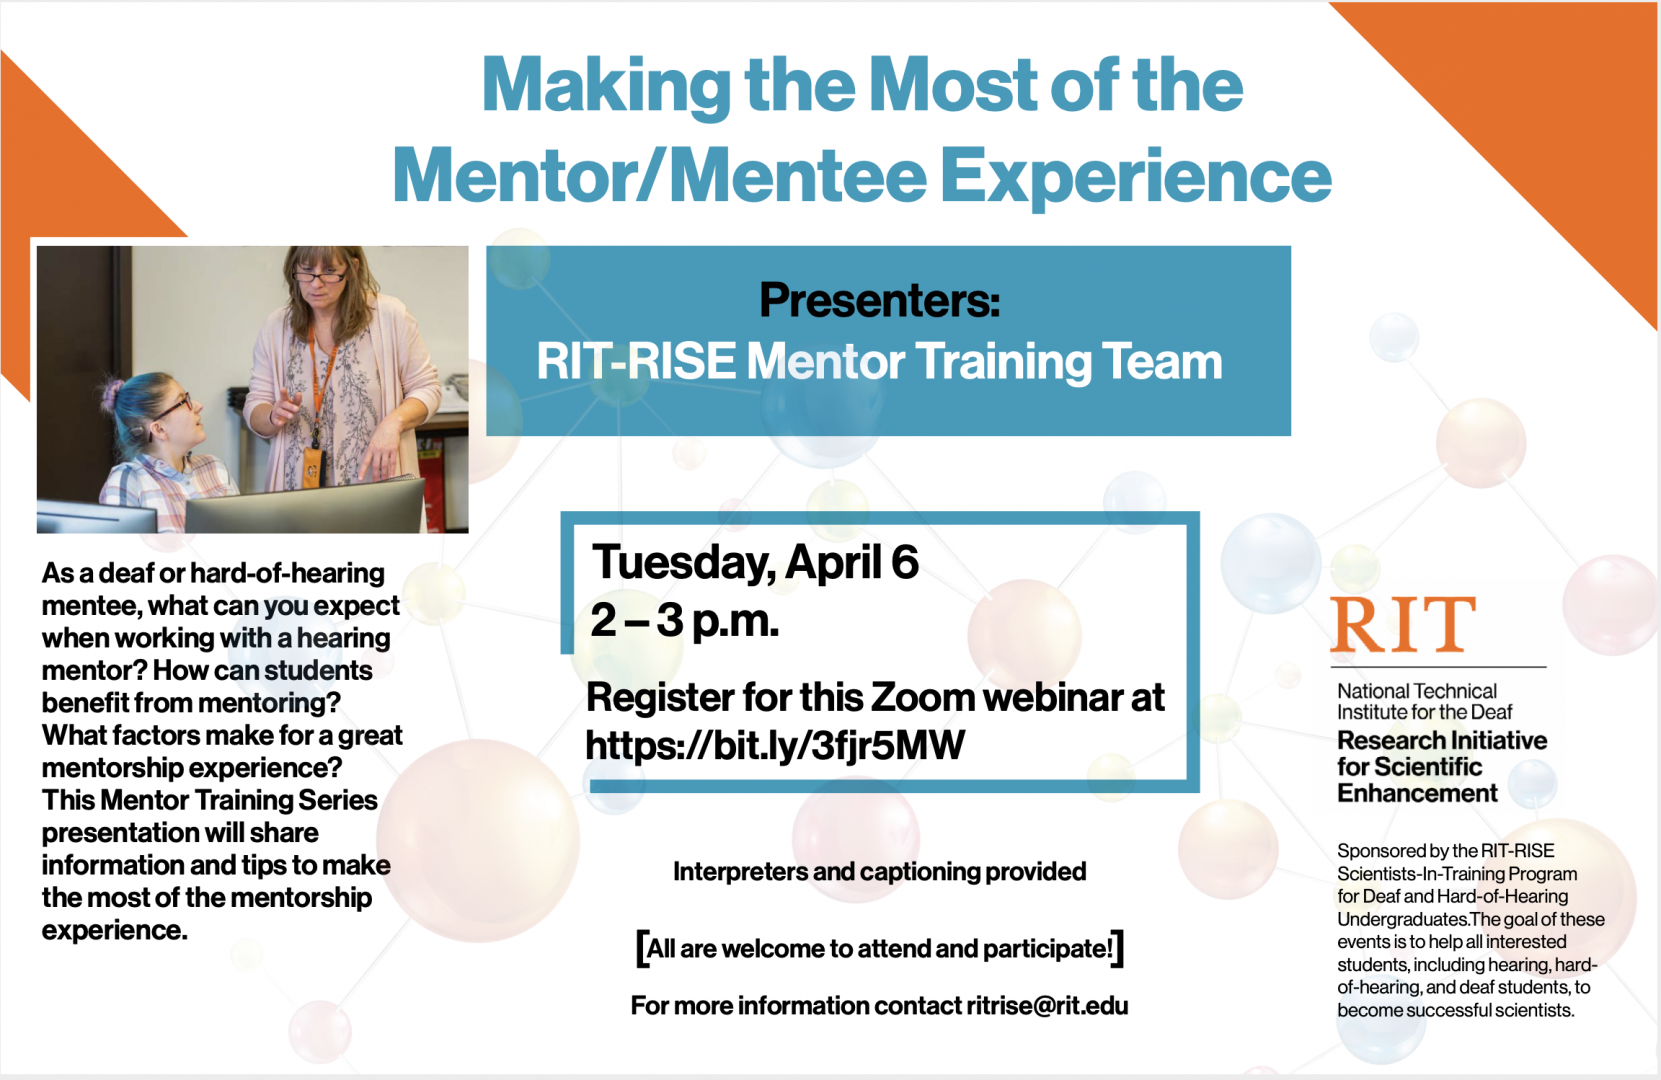 “Making the Most of the Mentor/Mentee Experience” presented by the RIT-RISE Mentor Training Team. Interpreters and captioning provided. All are welcome to attend and participate! Tuesday, April 6 from 2:00-3:00pm. Register for this Zoom webinar at https://bit.ly/3fjr5MW. For more information contact ritrise@rit.edu